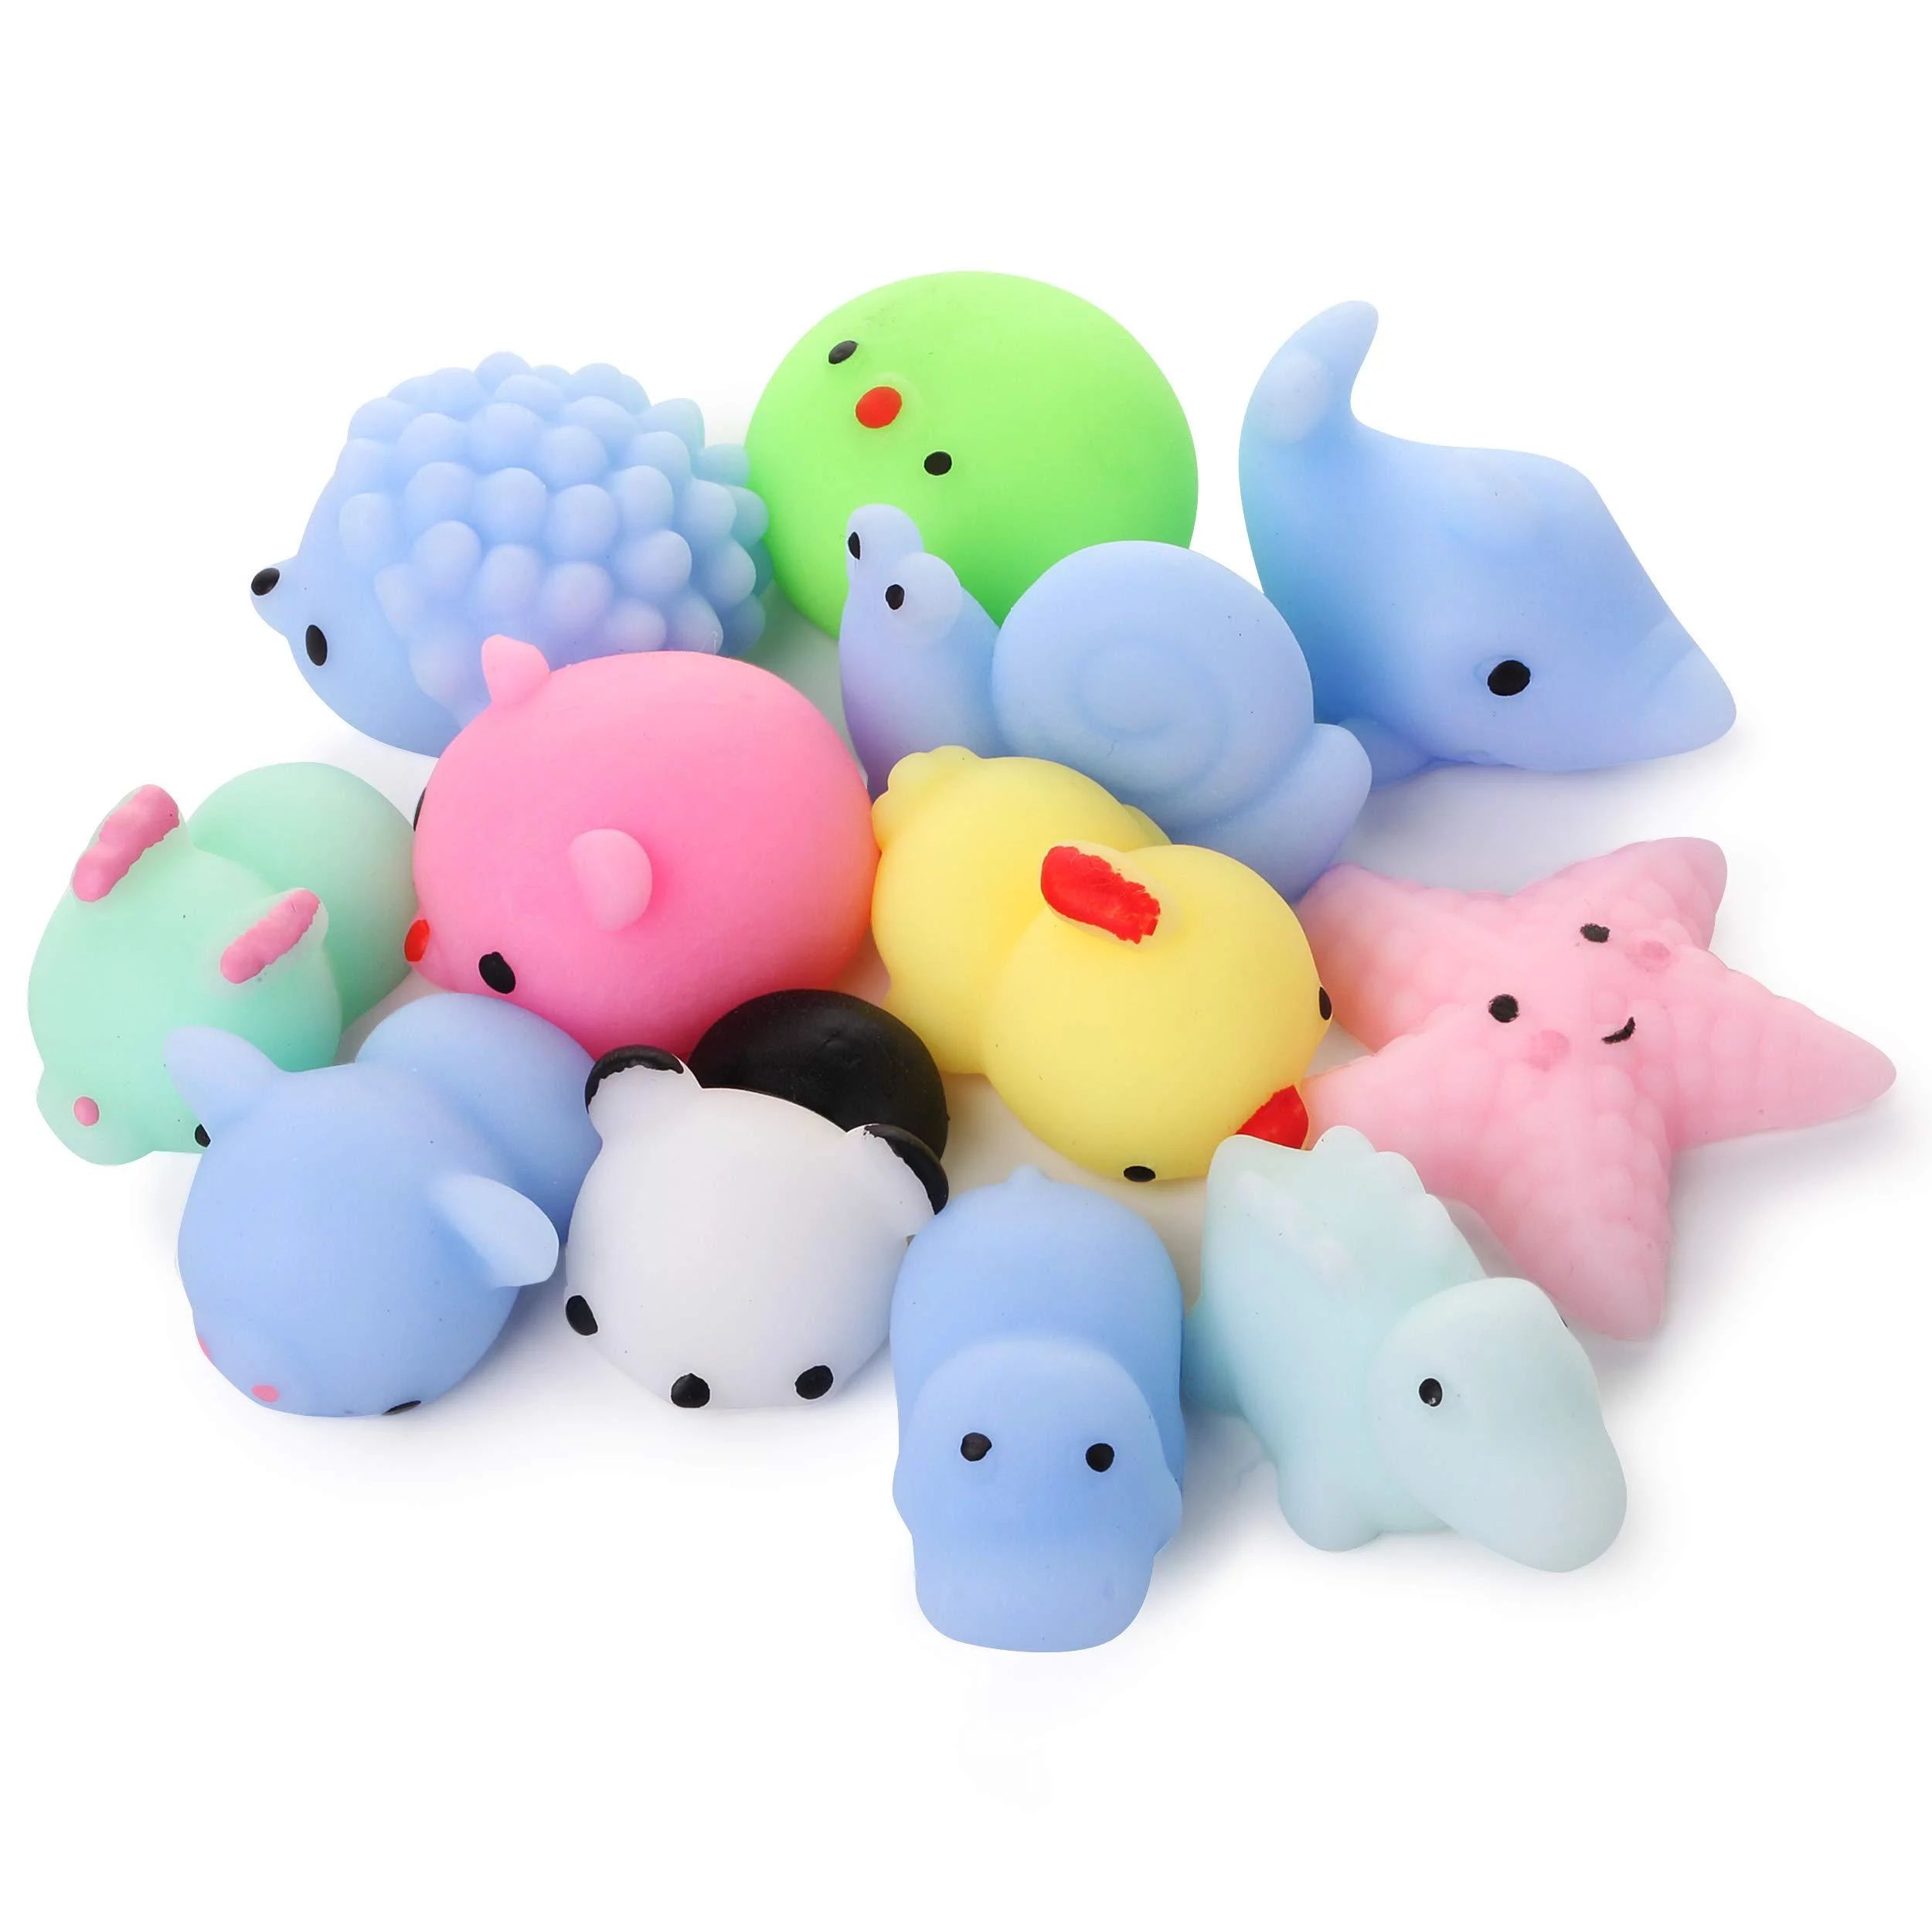 Mr. Pen- Squishy Toys, 12 Pack, Squishy, Squishes for Kids, Squishy Toy, Squishy Pack, Squishes, ... | Walmart (US)